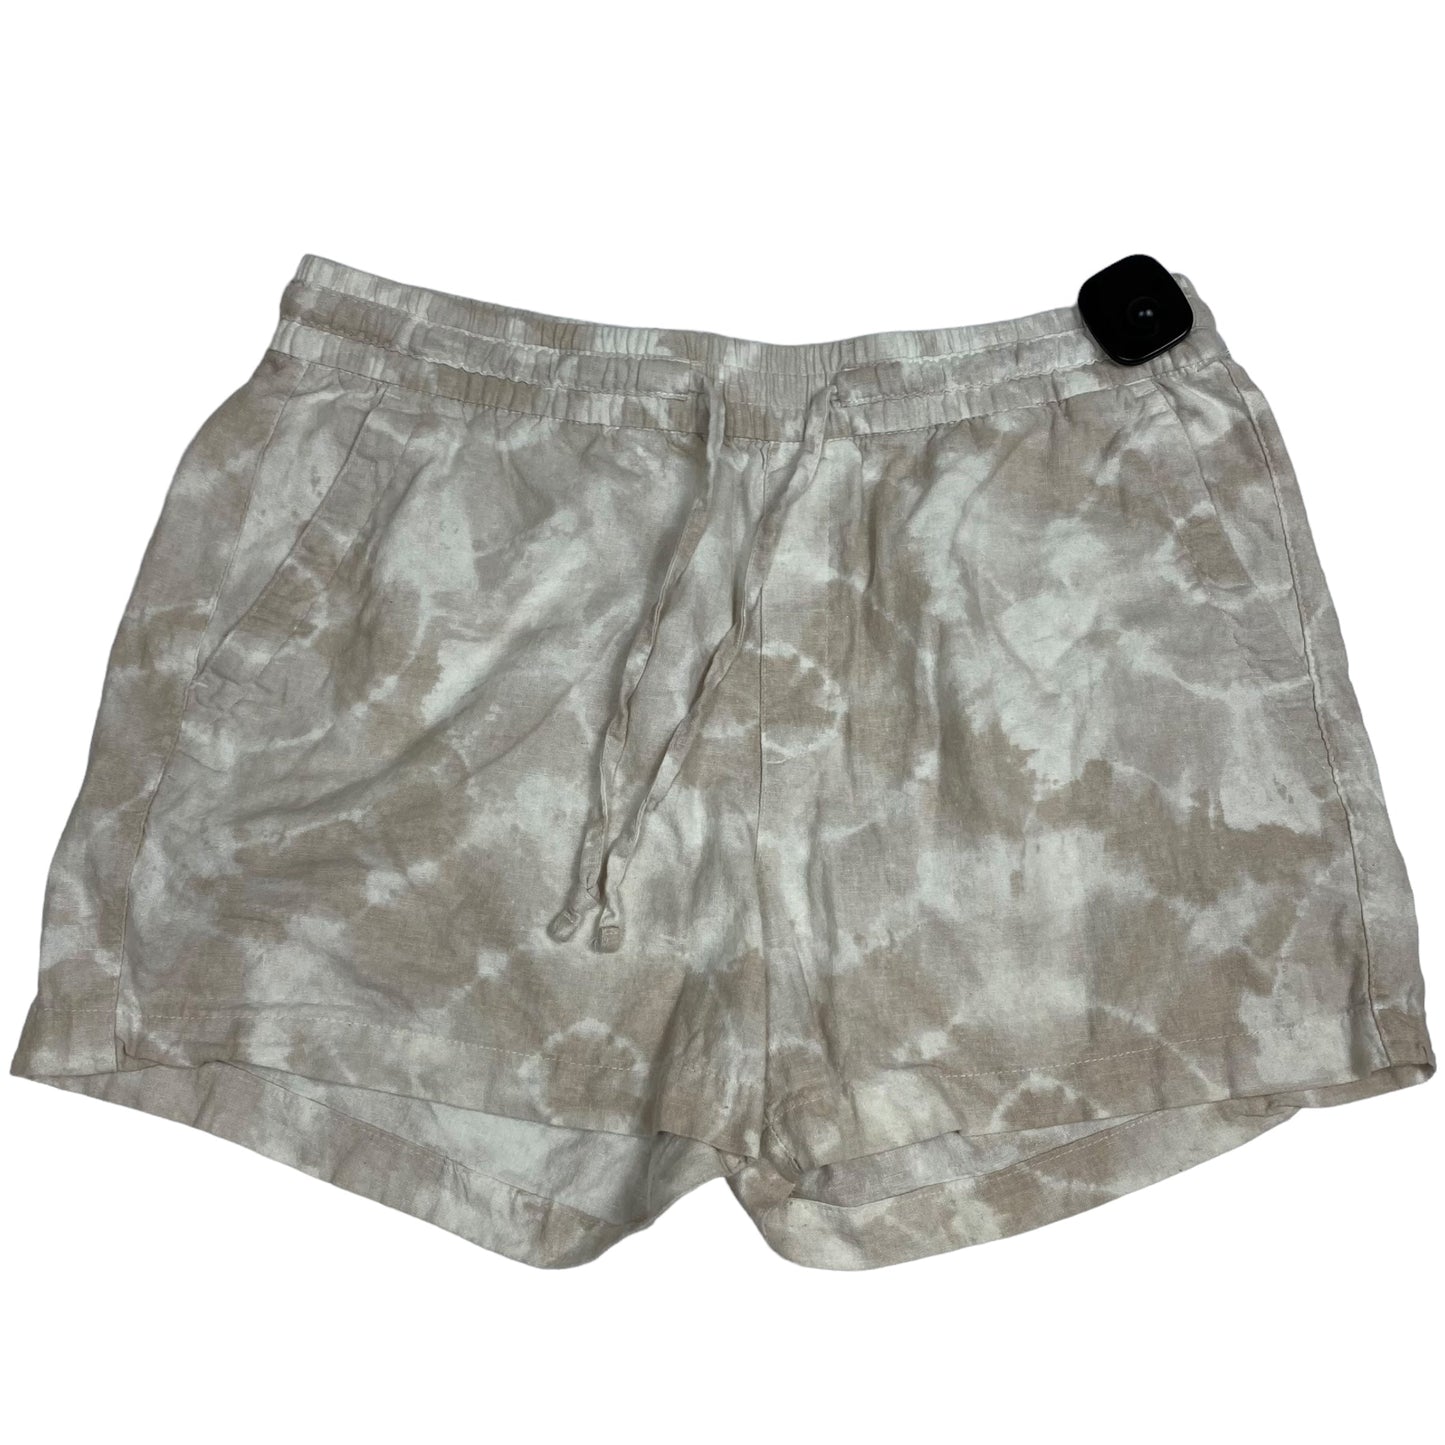 Shorts By Old Navy  Size: M